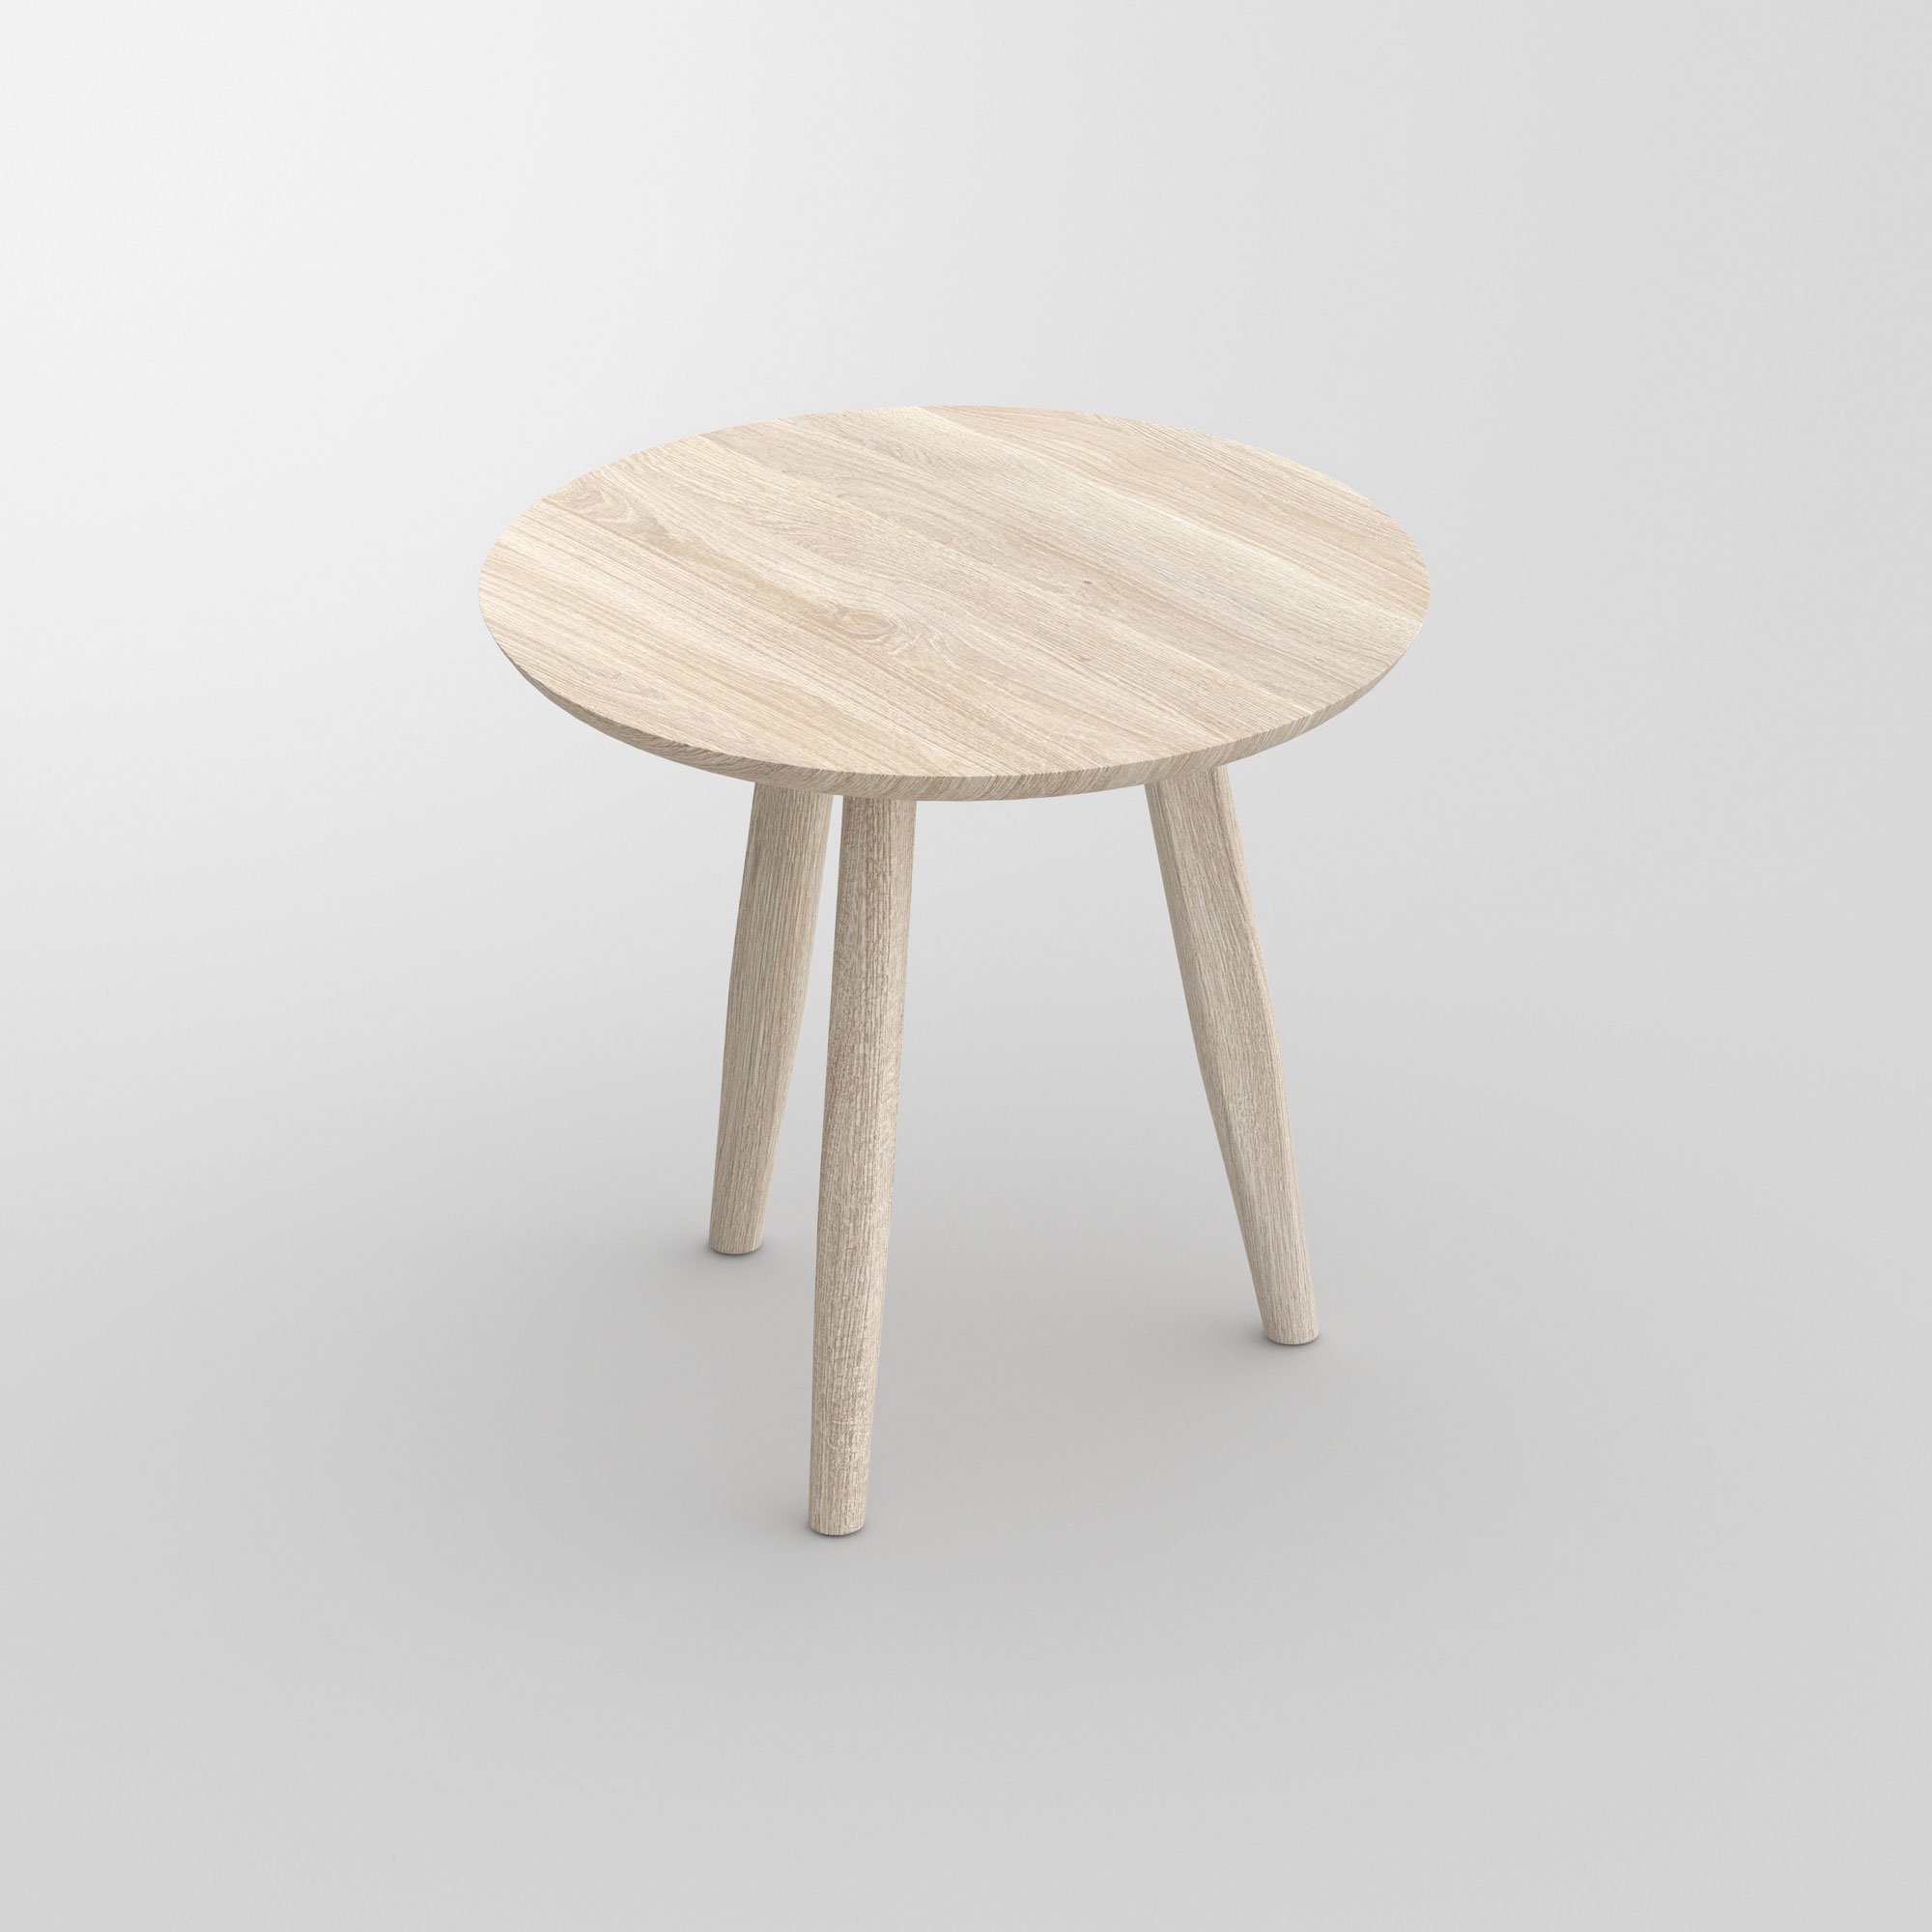 Round Night Table AETAS ROUND cam1 custom made in solid wood by vitamin design